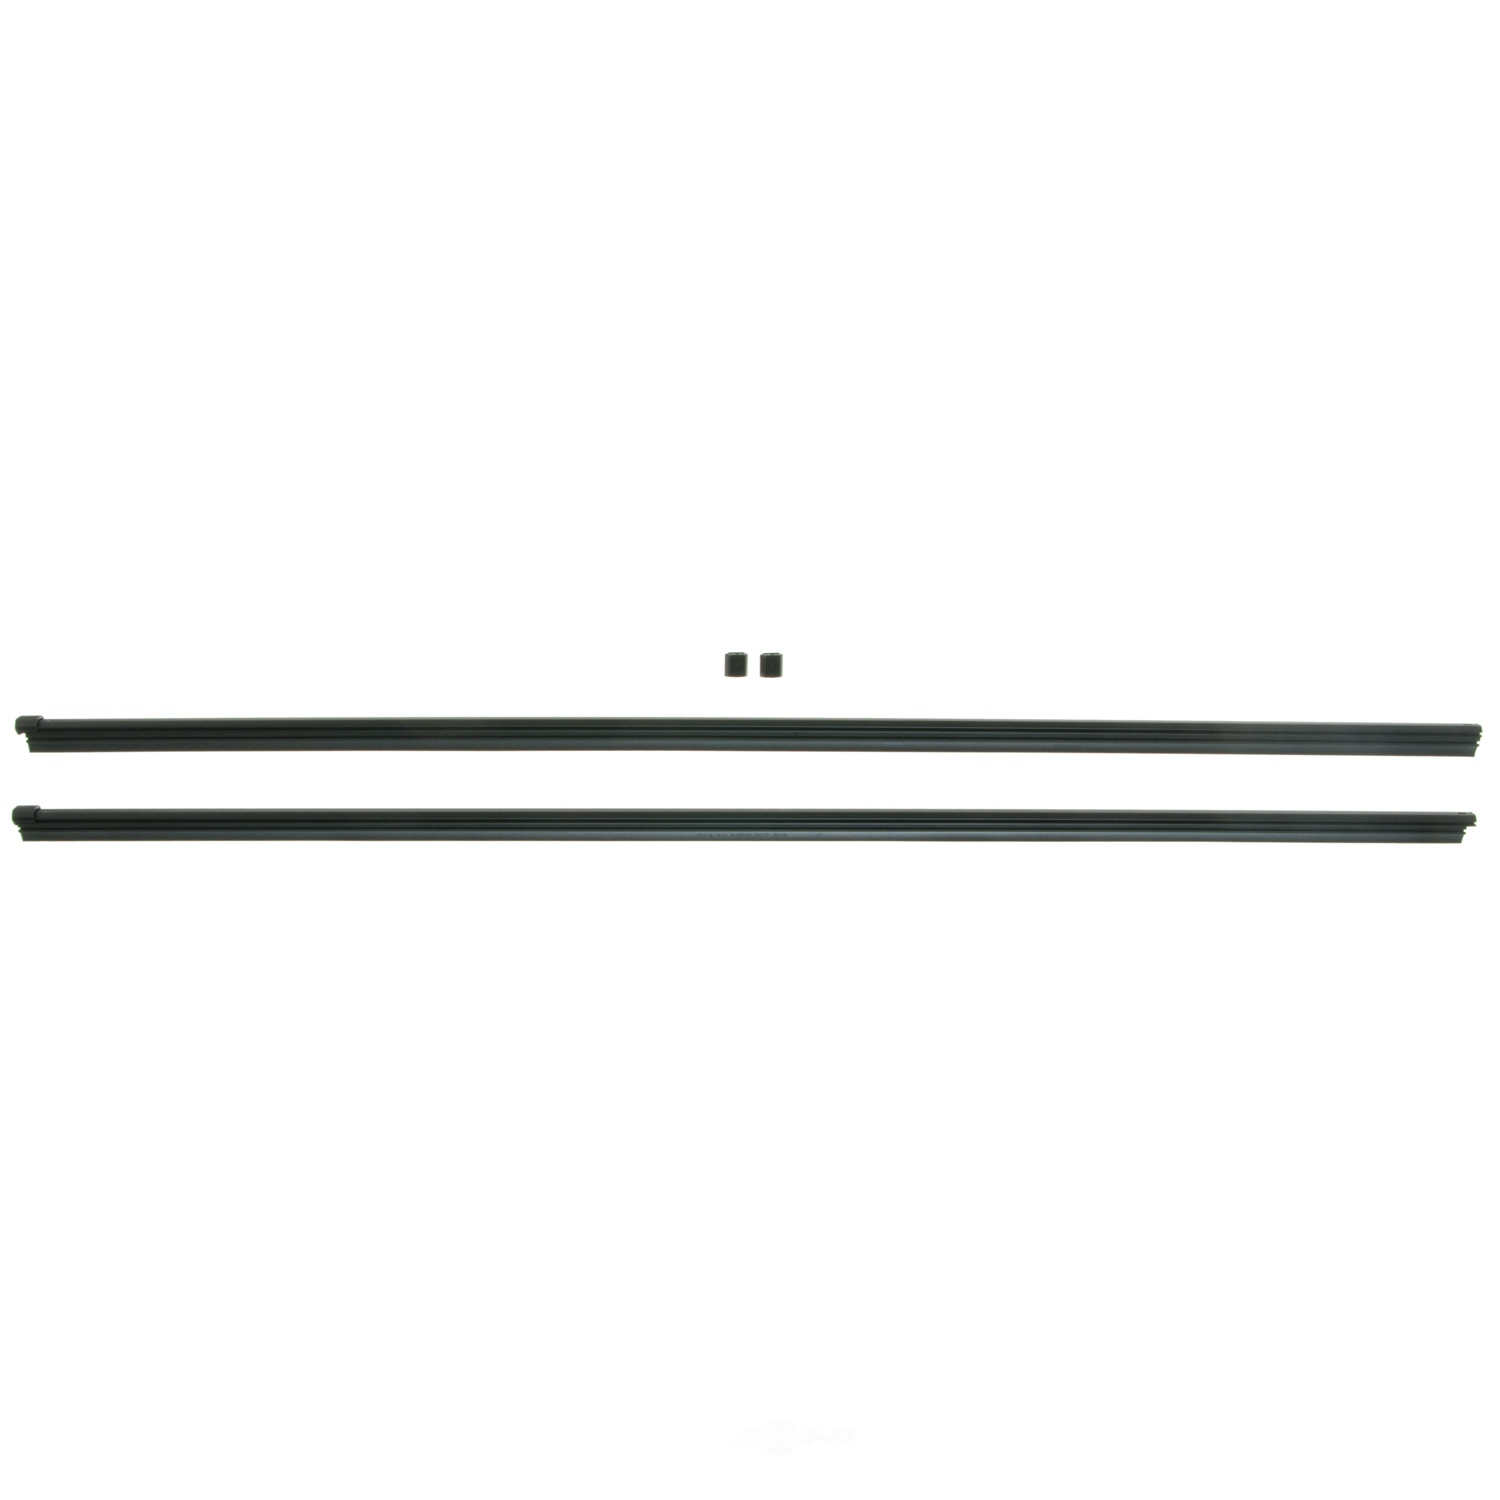 ANCO WIPER PRODUCTS - Wide Series Refills - ANC W-21R